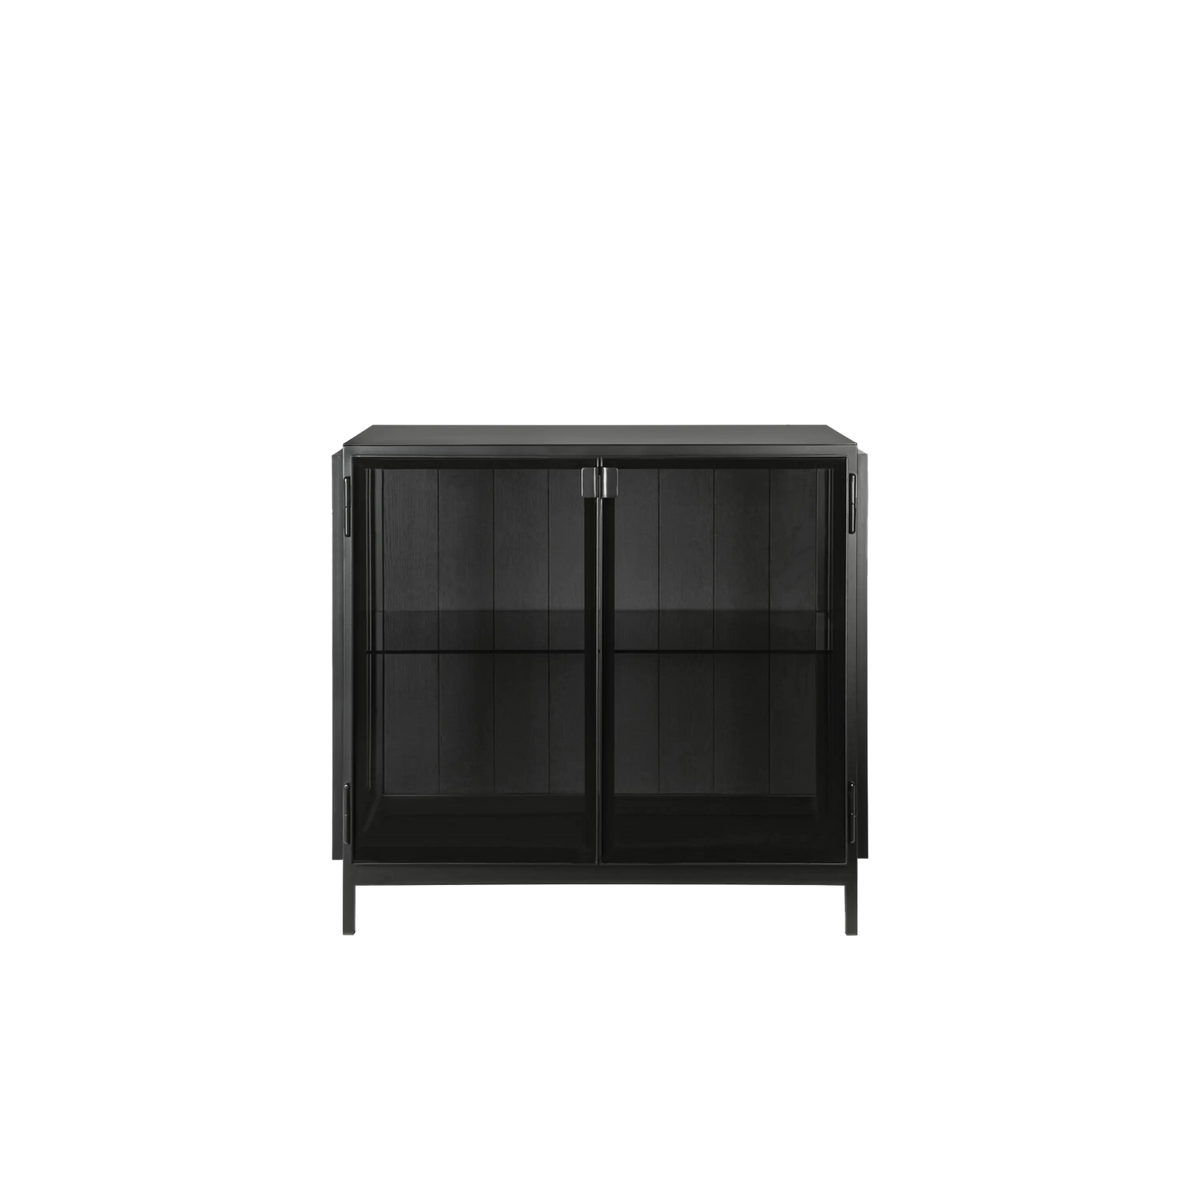 The Torsten Sideboard features a solid black frame that contrasts beautifully with the glass surface for a fresh twist on traditional cabinetry.